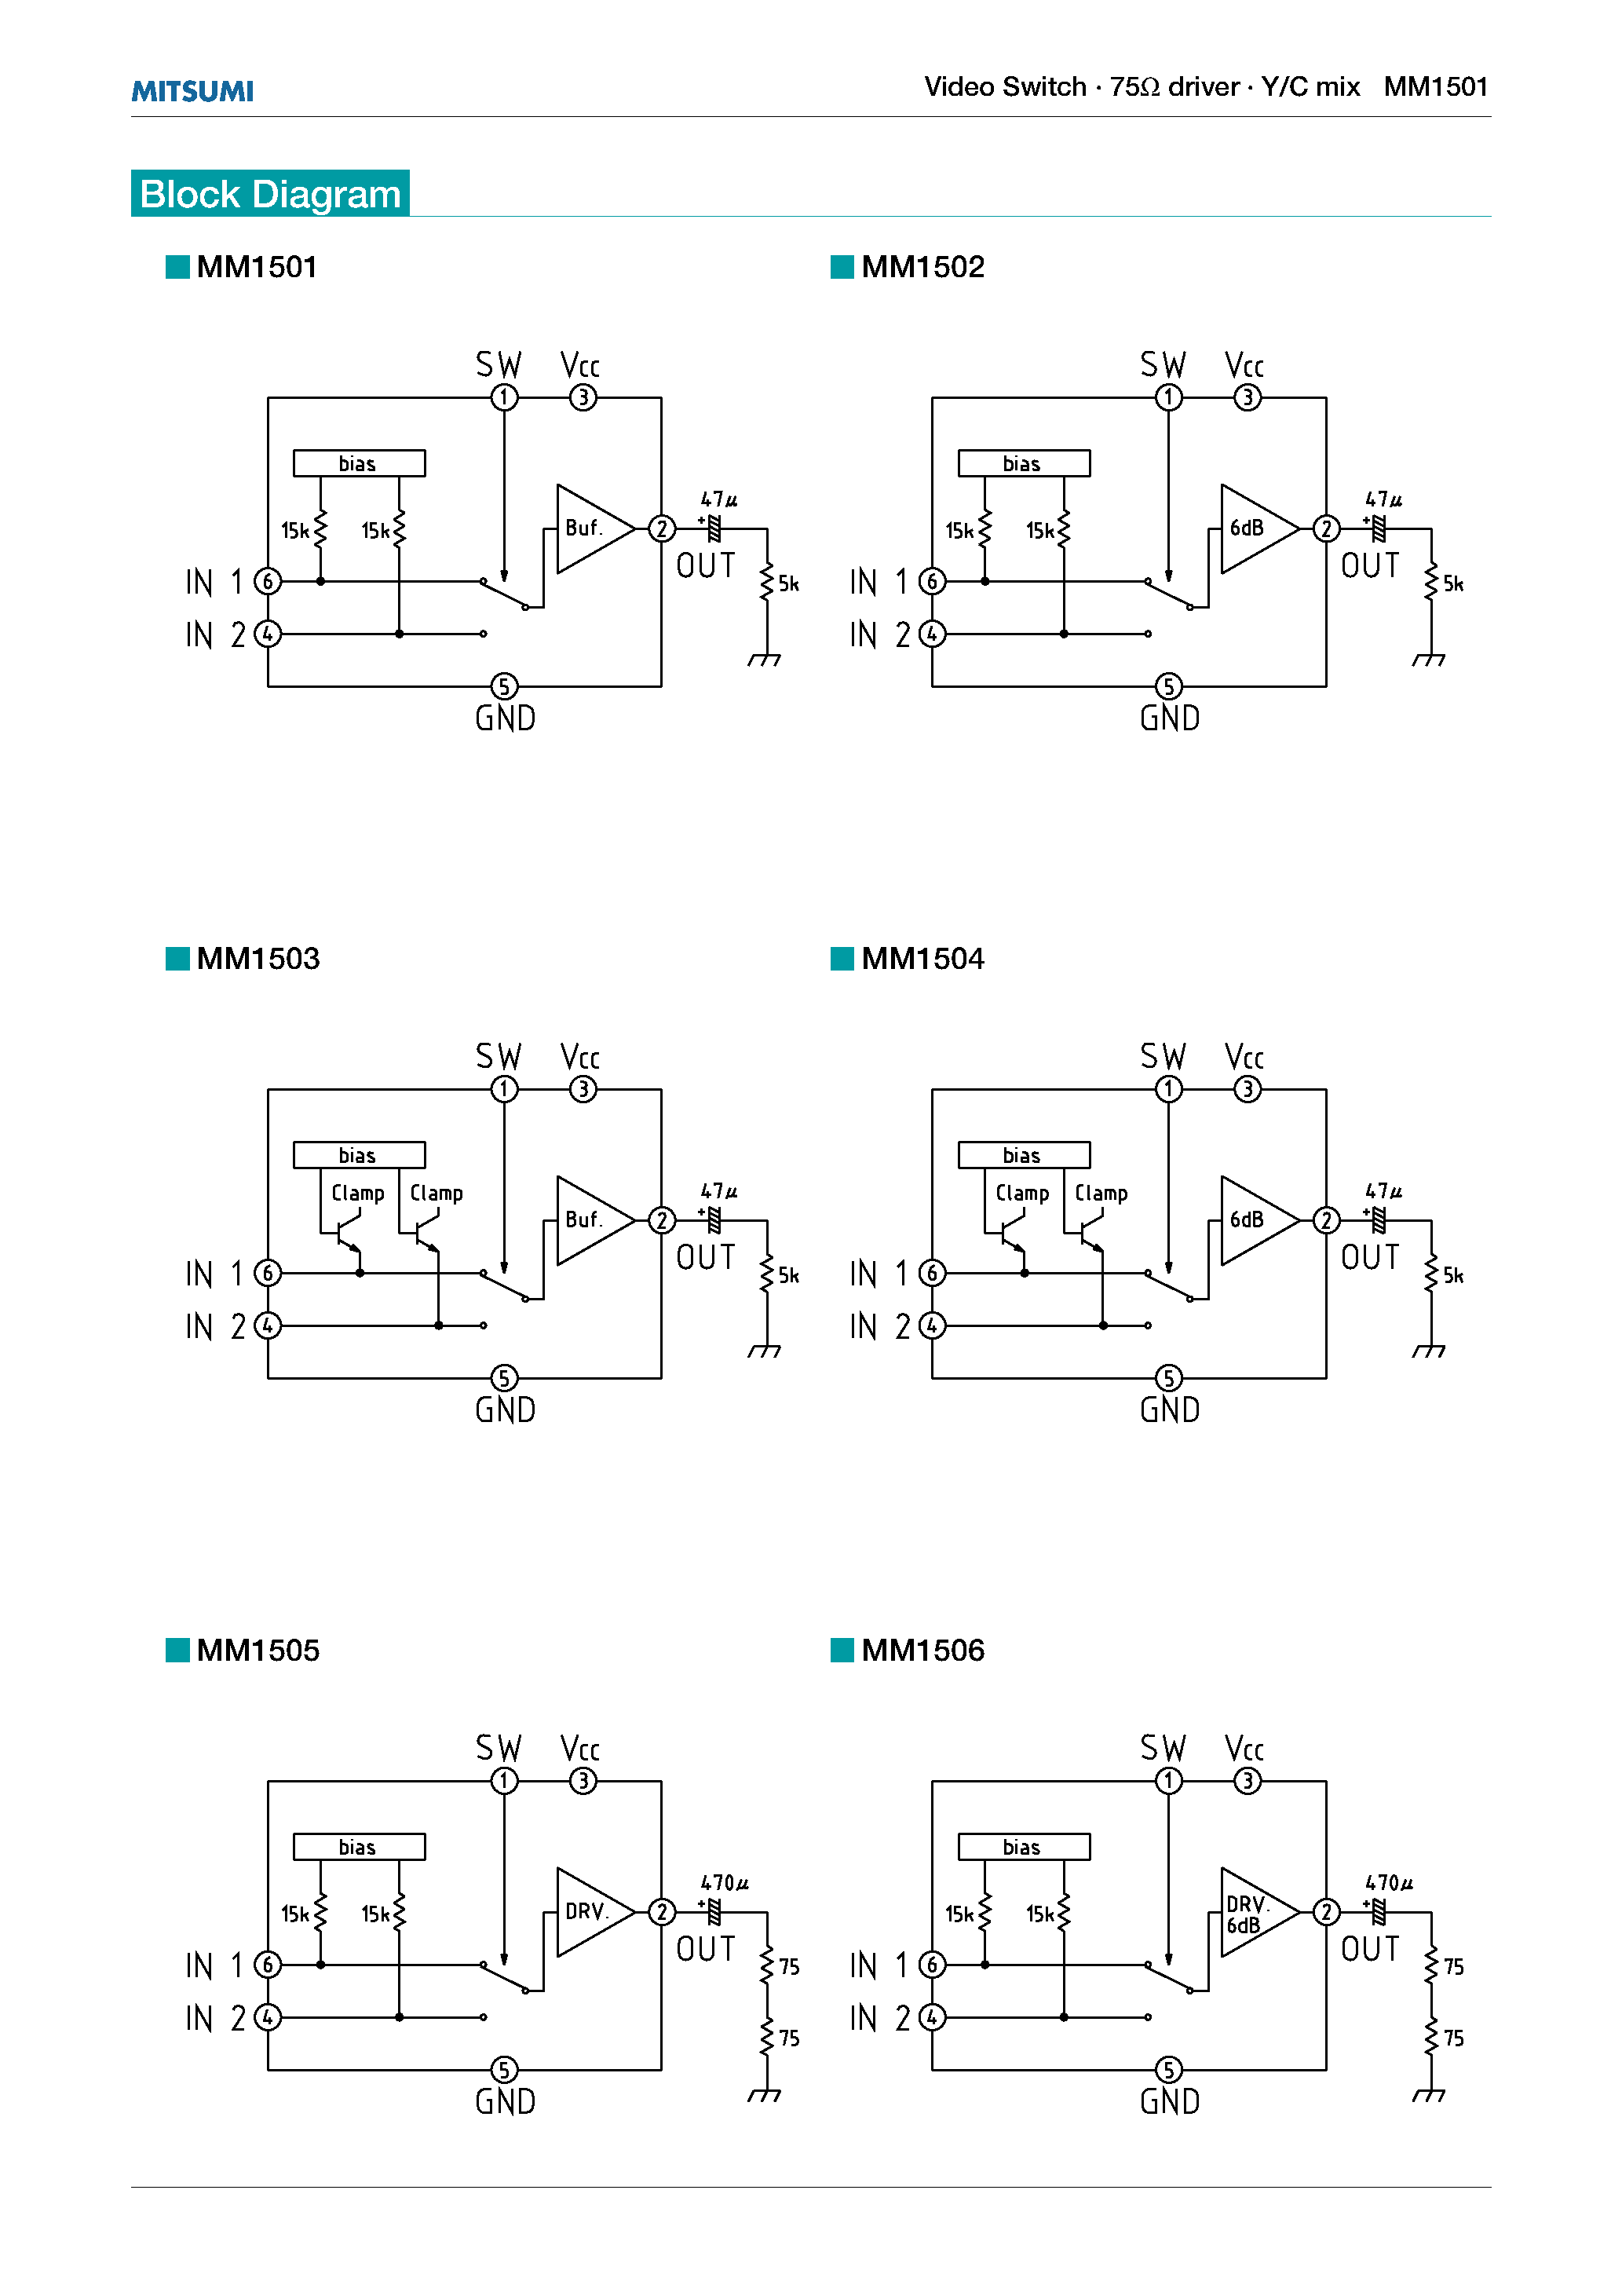 Datasheet MM1512 - Video Switch 75 driver Y/C mix page 2